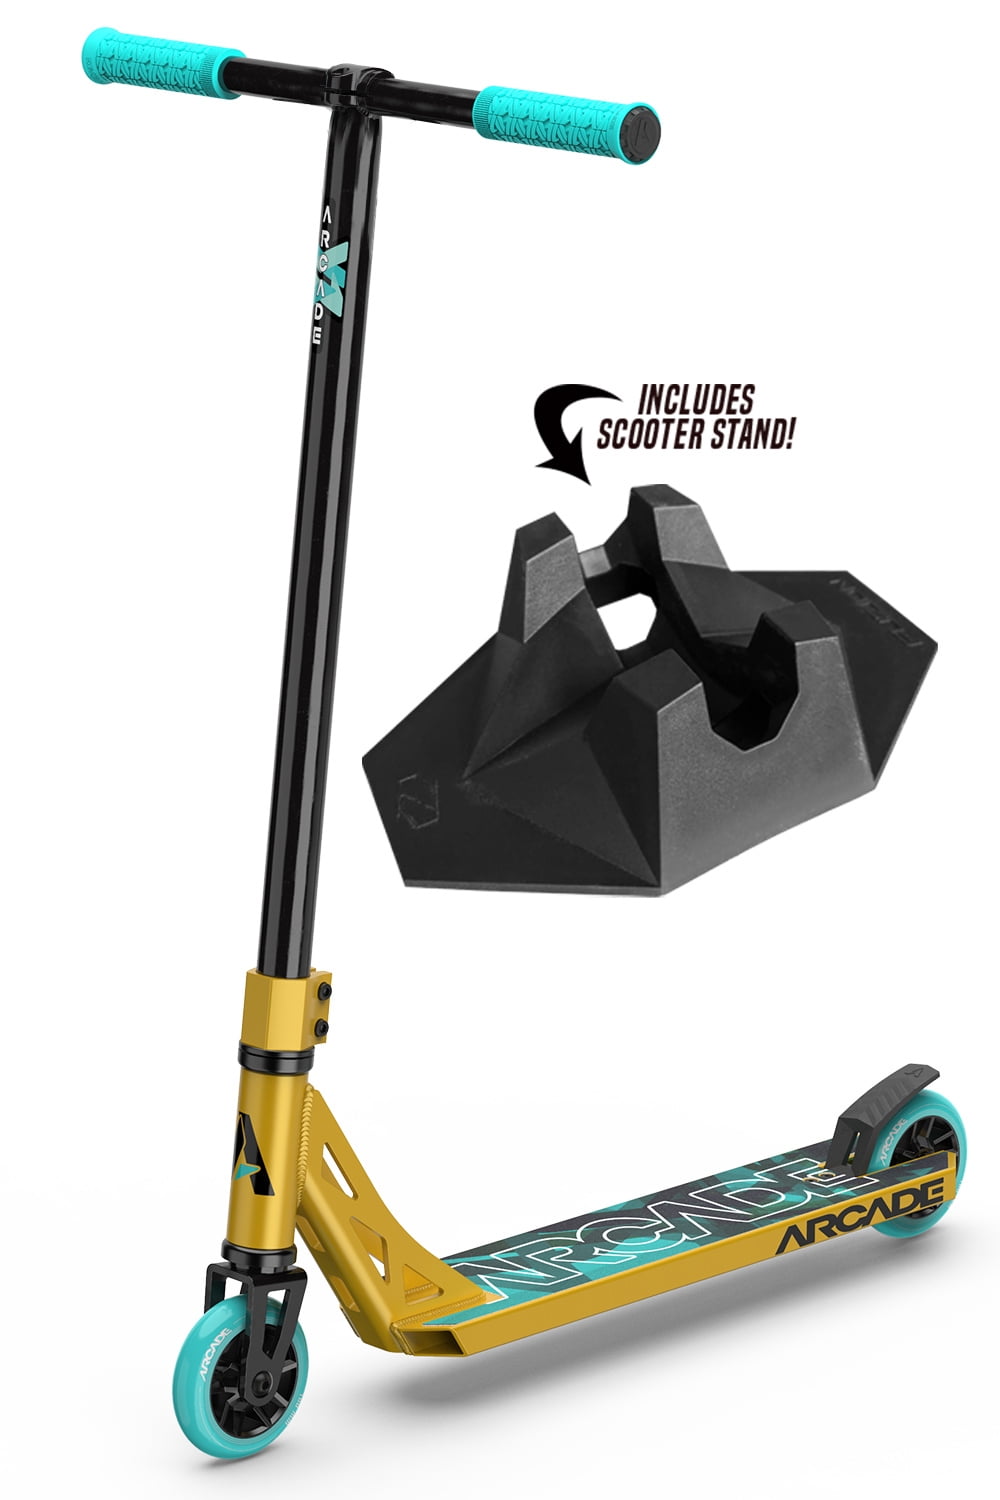 Arcade Action Sports Defender Pro Stunt Scooter For Kids 8 Years And Up, 2 Piece Handlebar, Includes Stand!